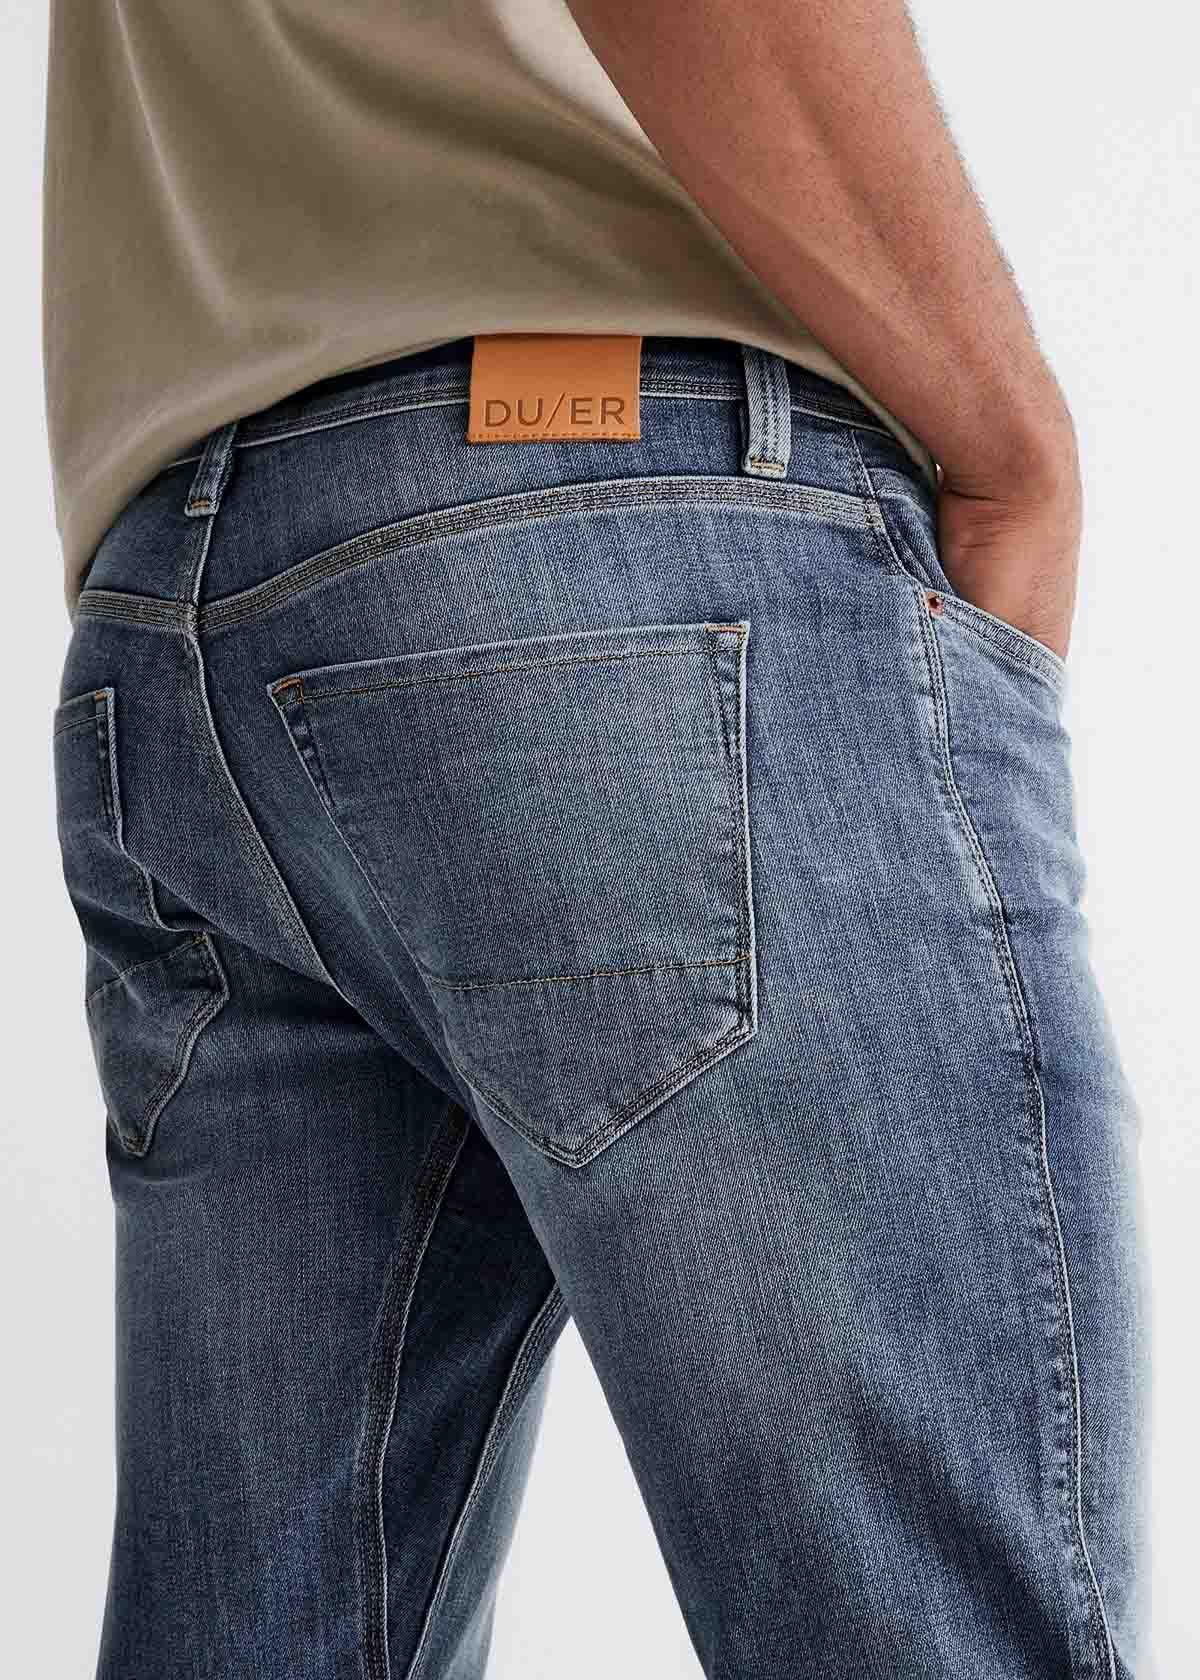 GAP Mens Soft High Stretch Skinny Fit Jeans, Rinse Washed Indigo, 32W x 32L  US at  Men's Clothing store